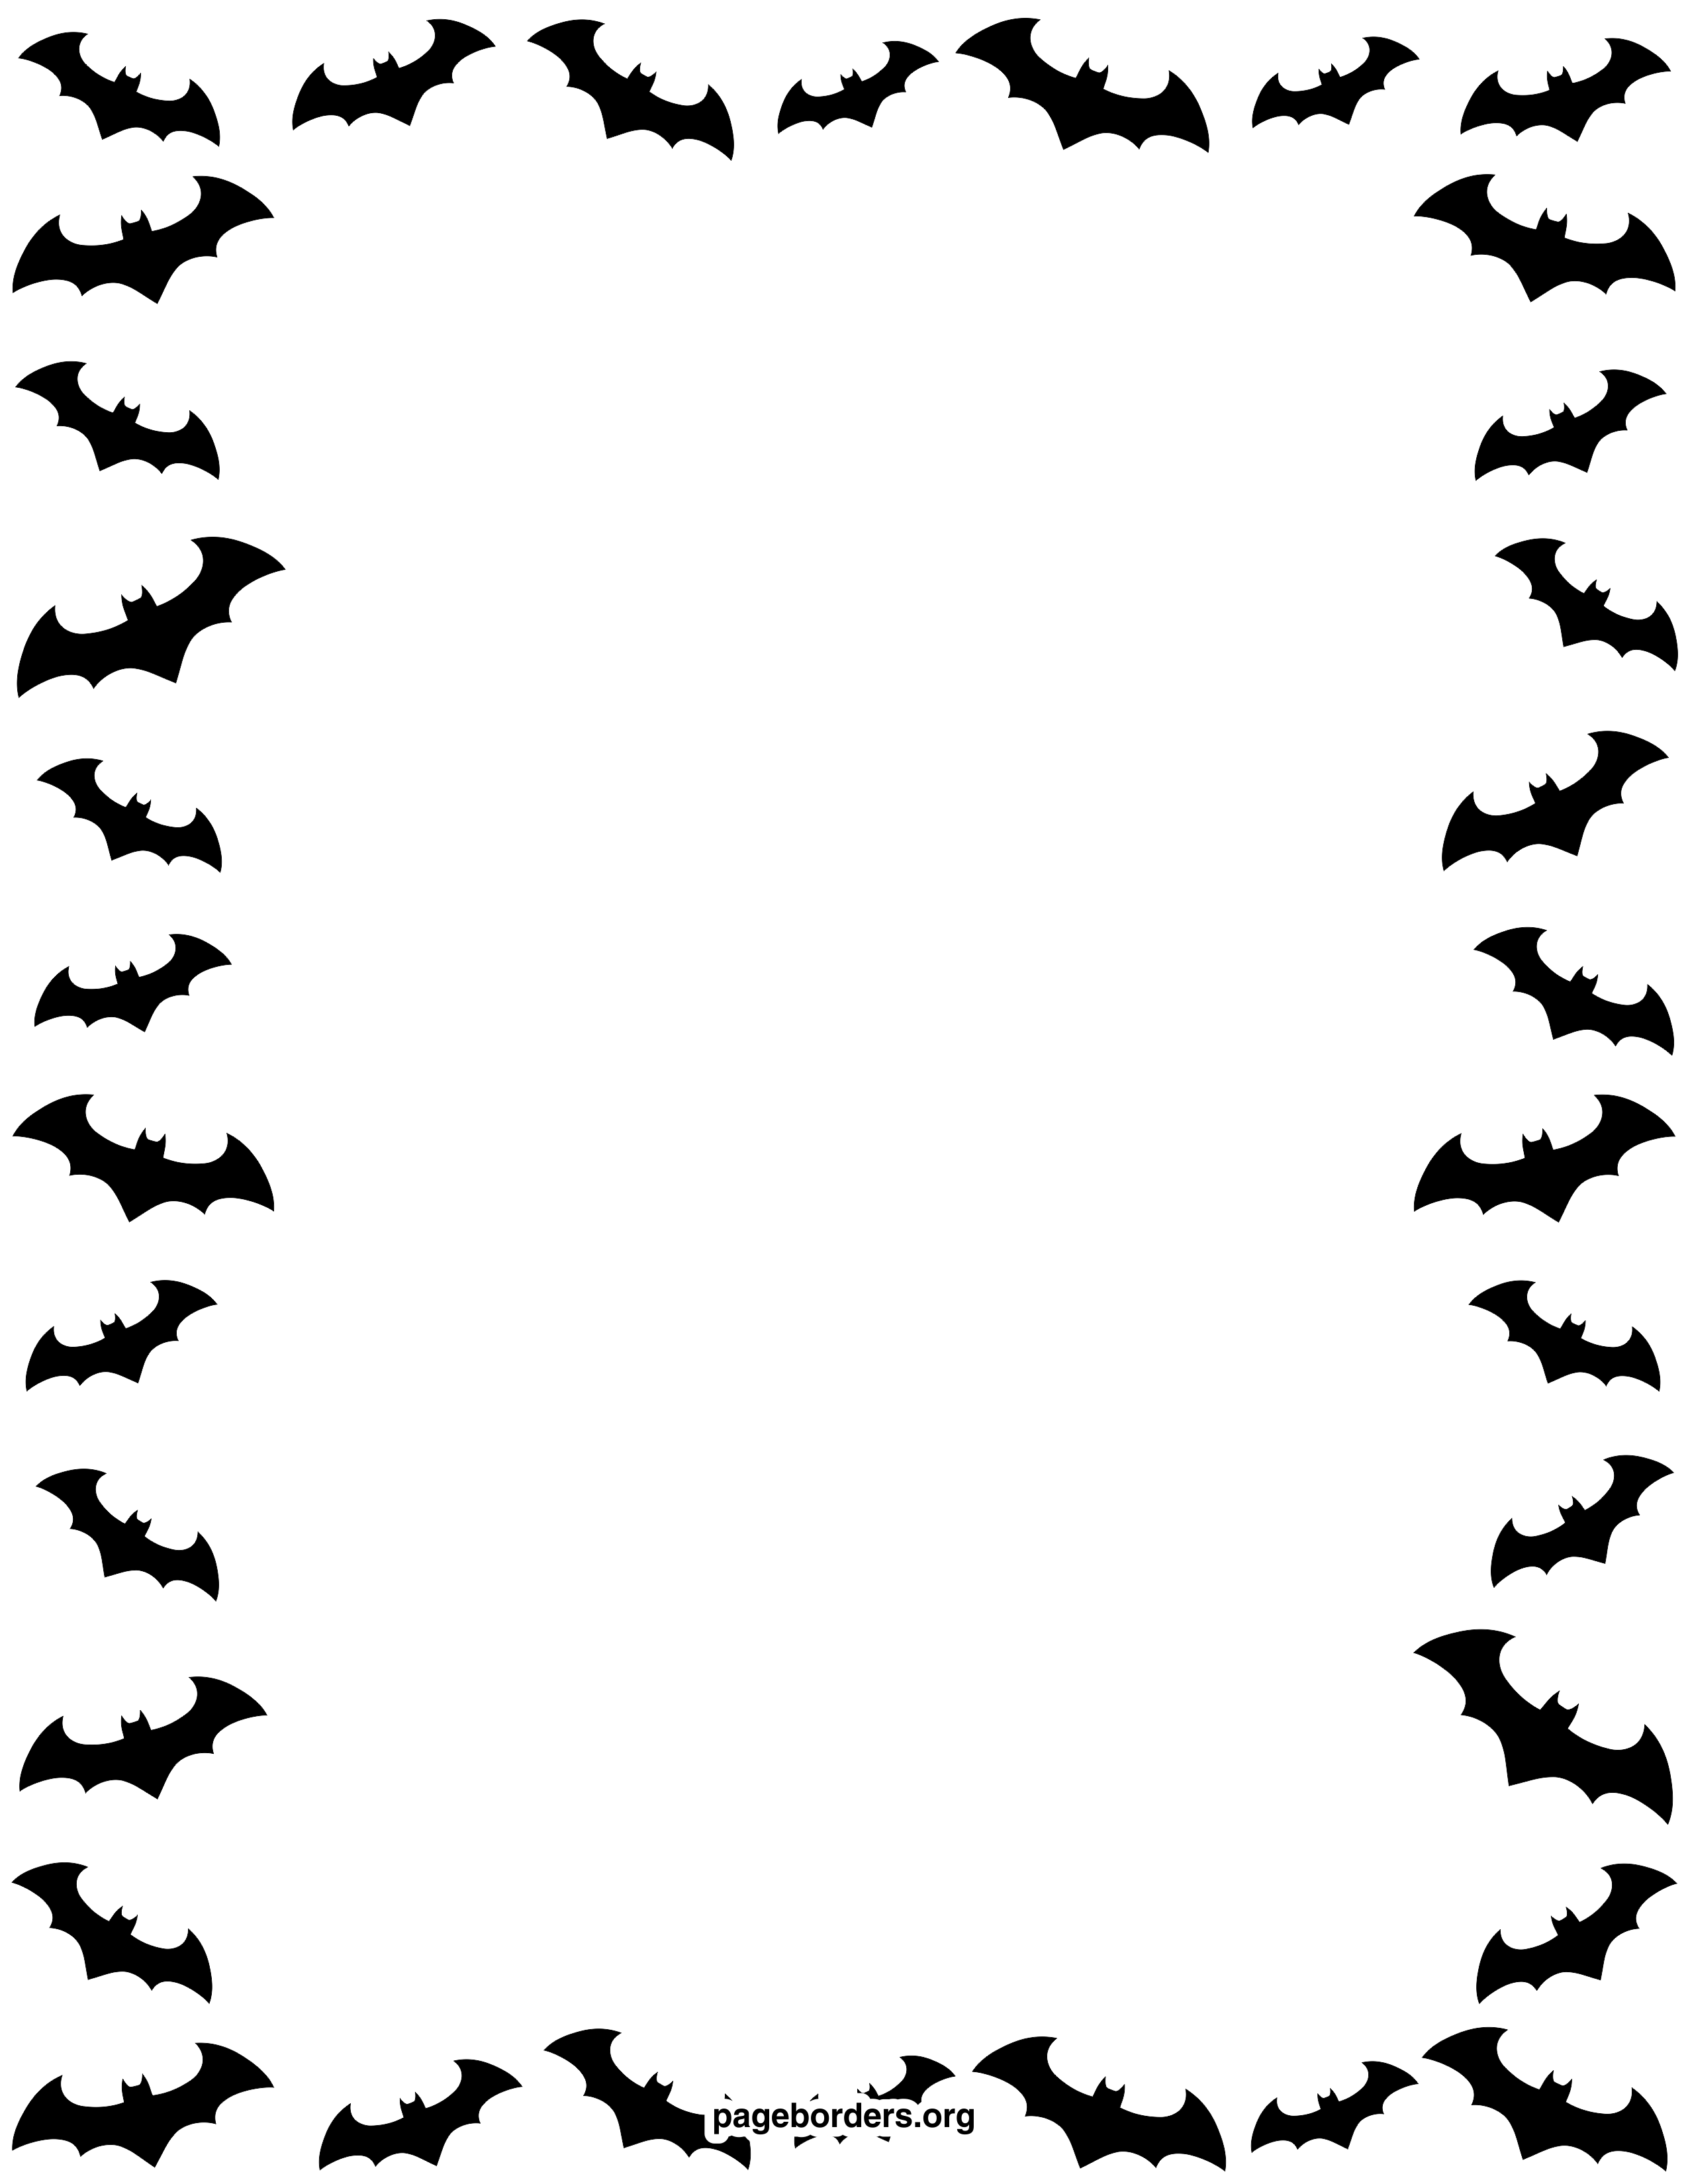 A word document border for halloween clipart image 41171